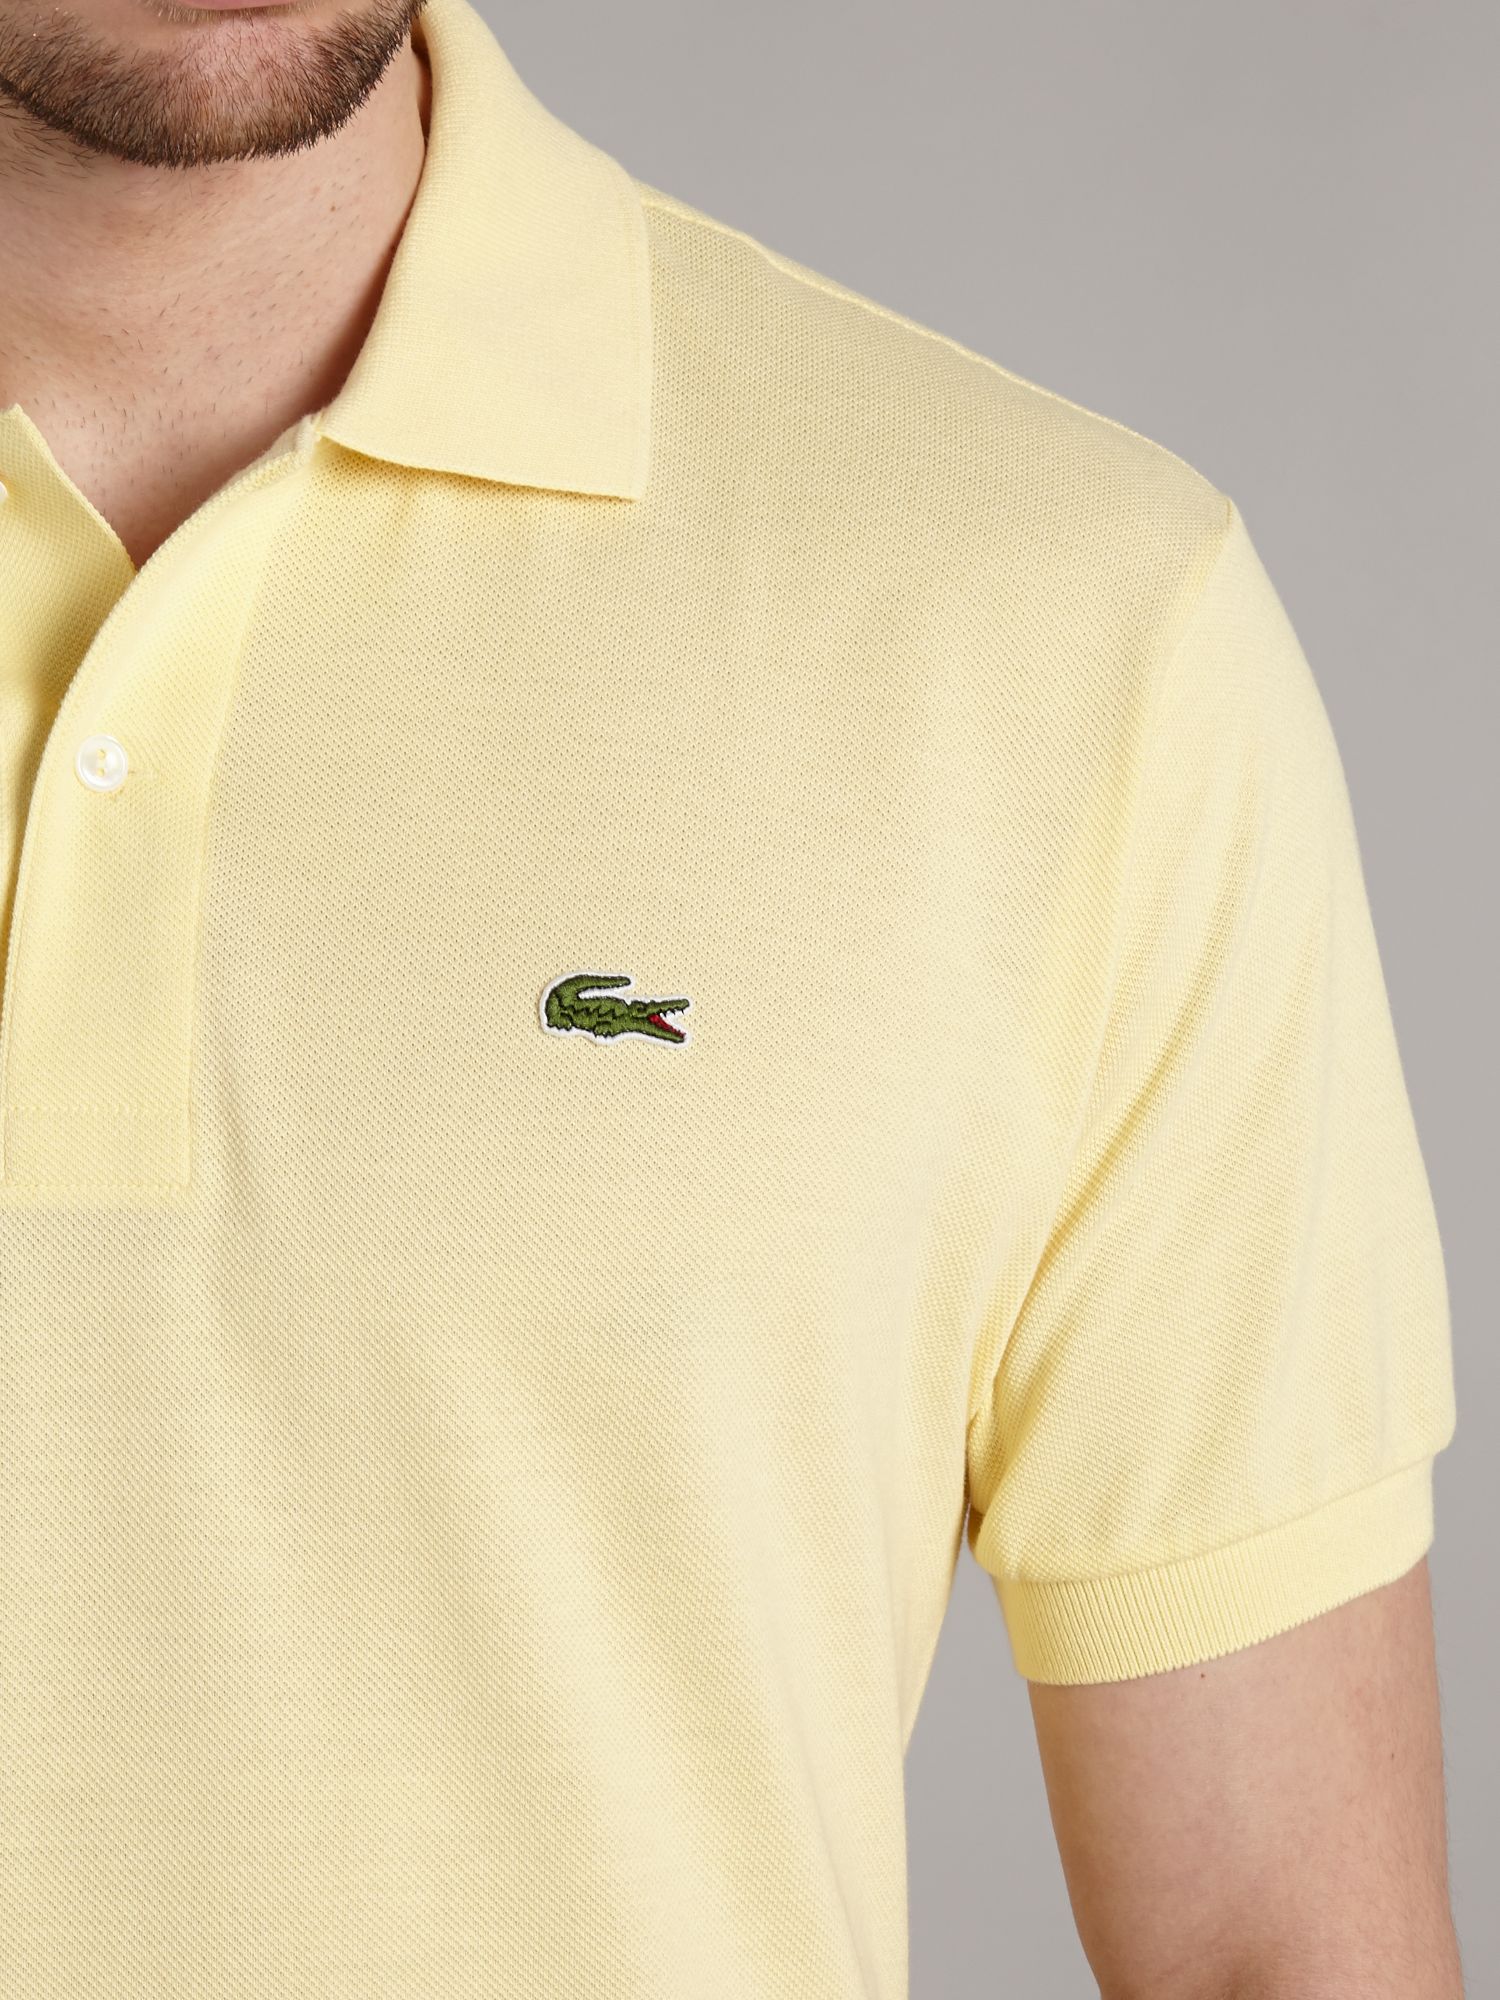 Lacoste Classic Polo Shirt in Pastel Yellow (Yellow) for Men - Lyst